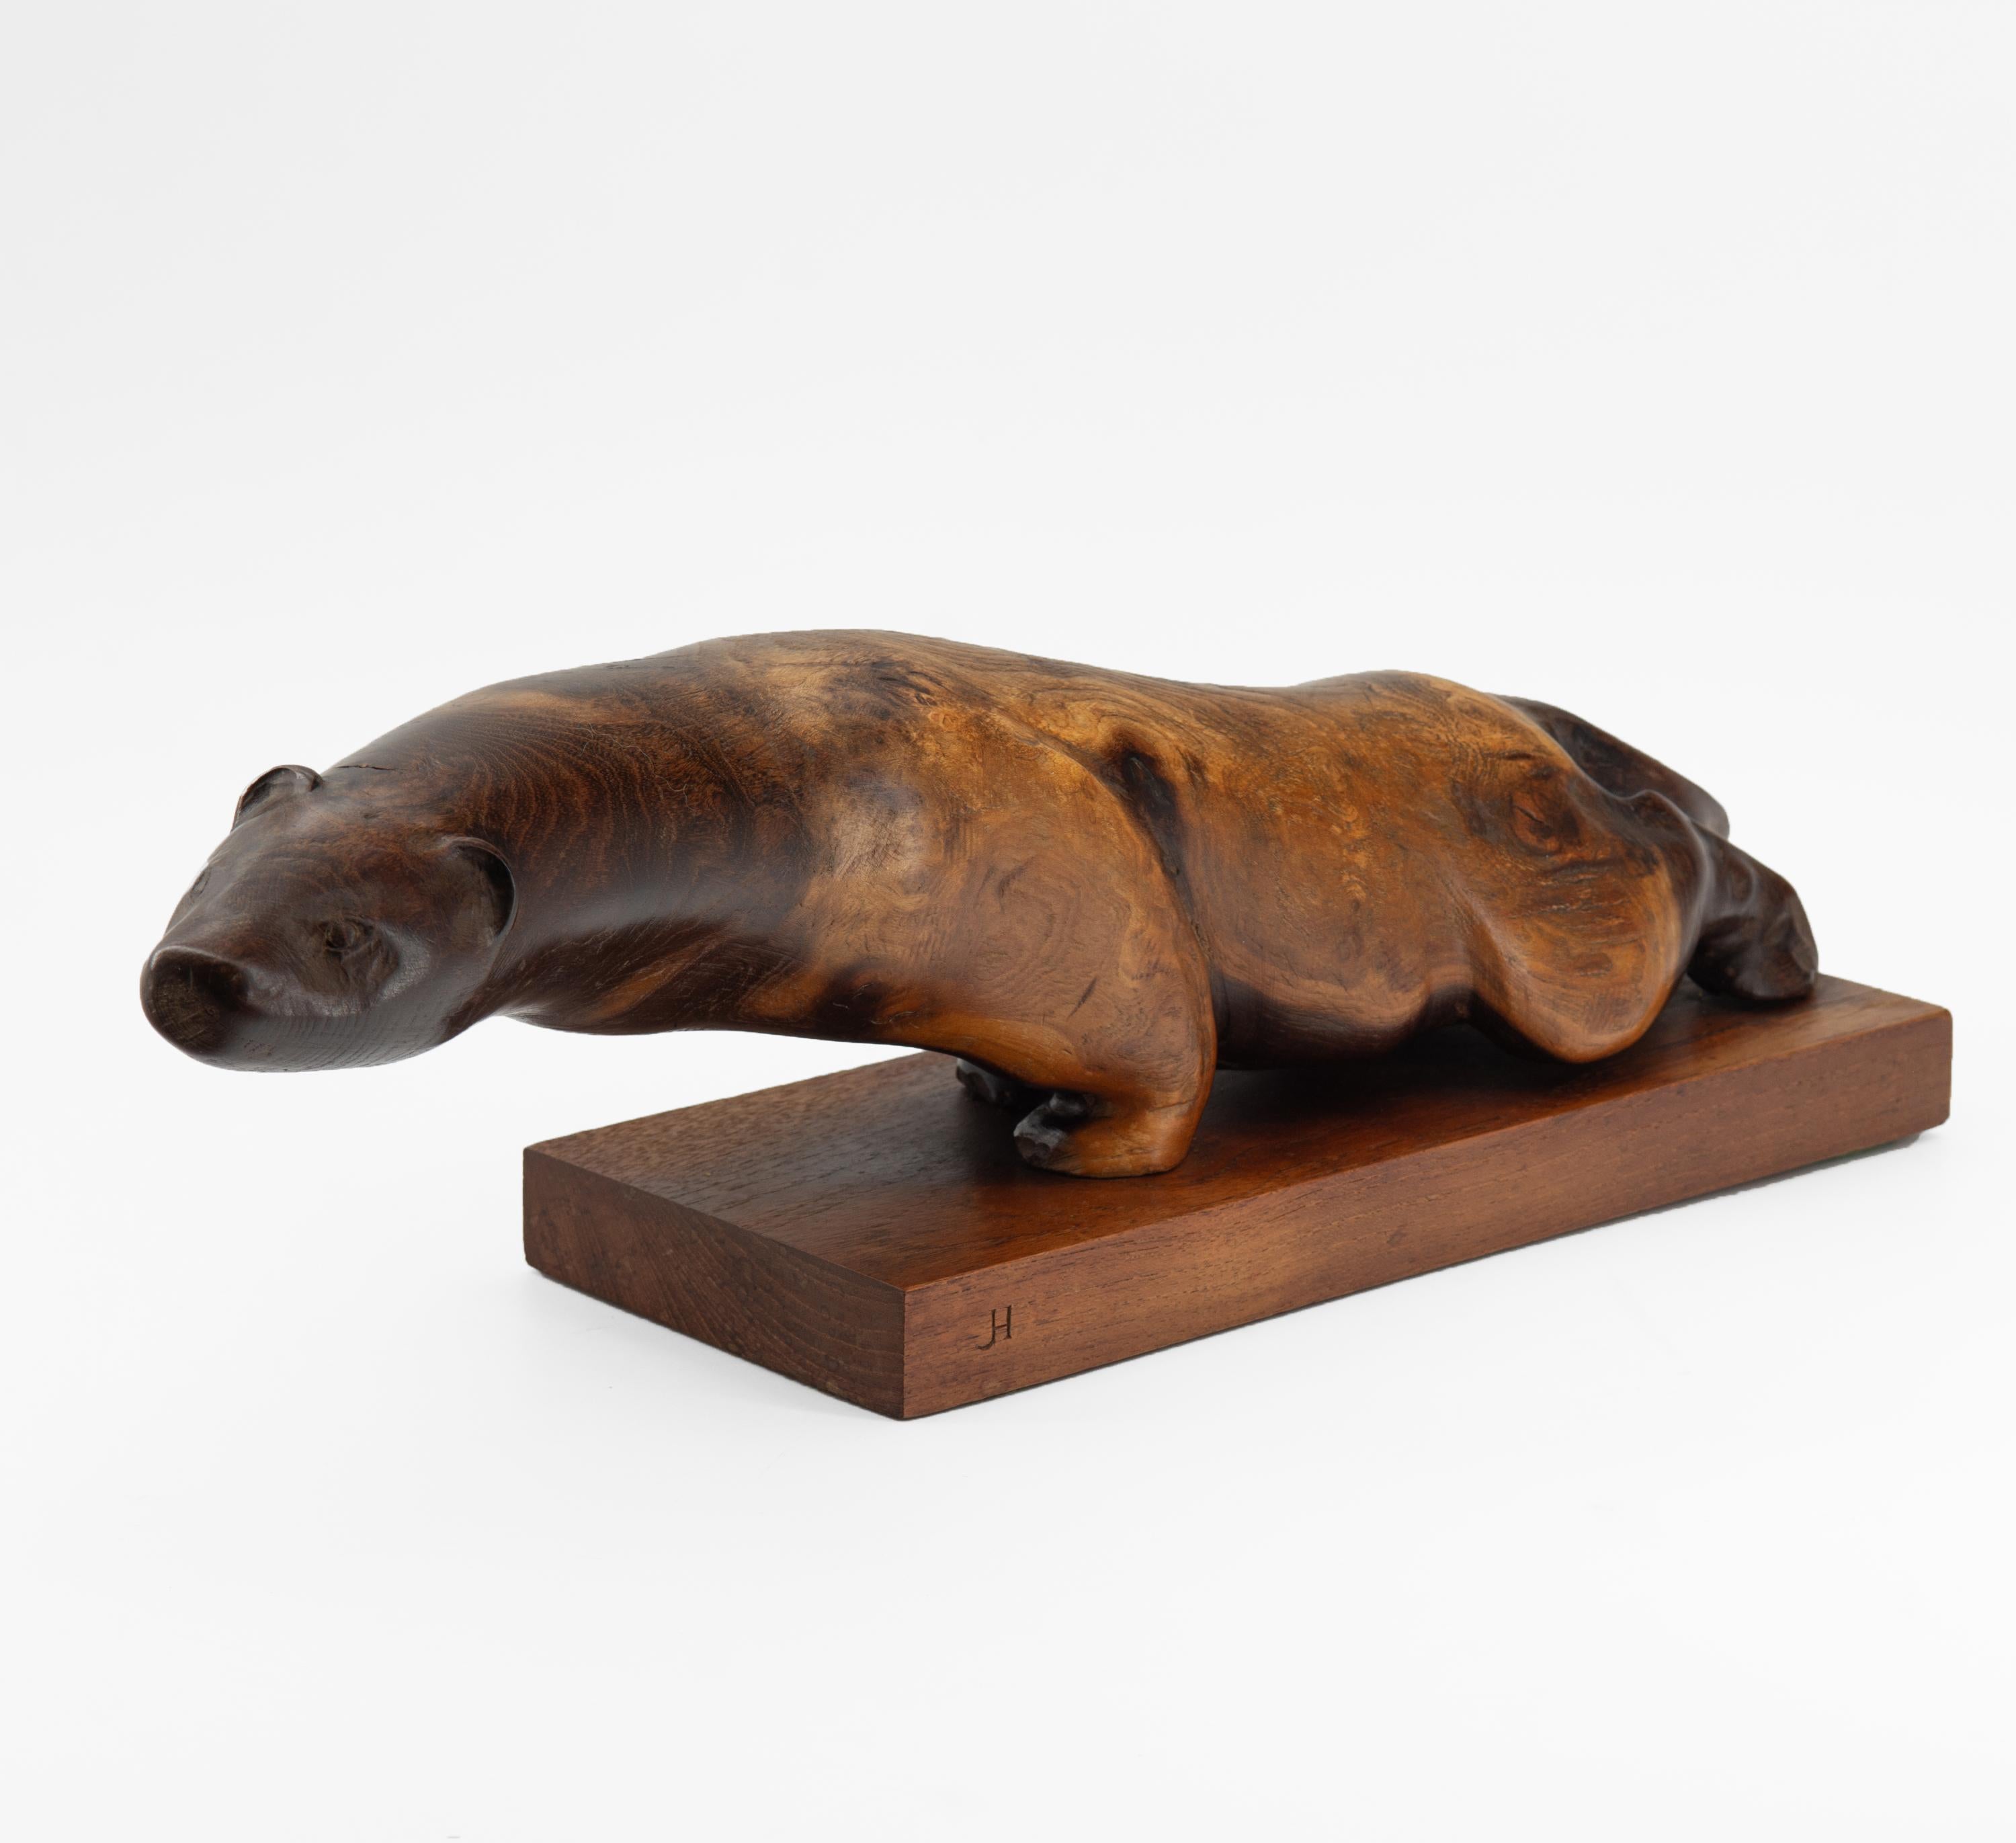 Vintage carved otter sculpture in burr elm on a solid teak plinth. Signed initials JH. English. Circa 1960.

Beautifully hand carved, note the wonderful graining and contrasting colour from head to tail.  In very good original condition, no damage.